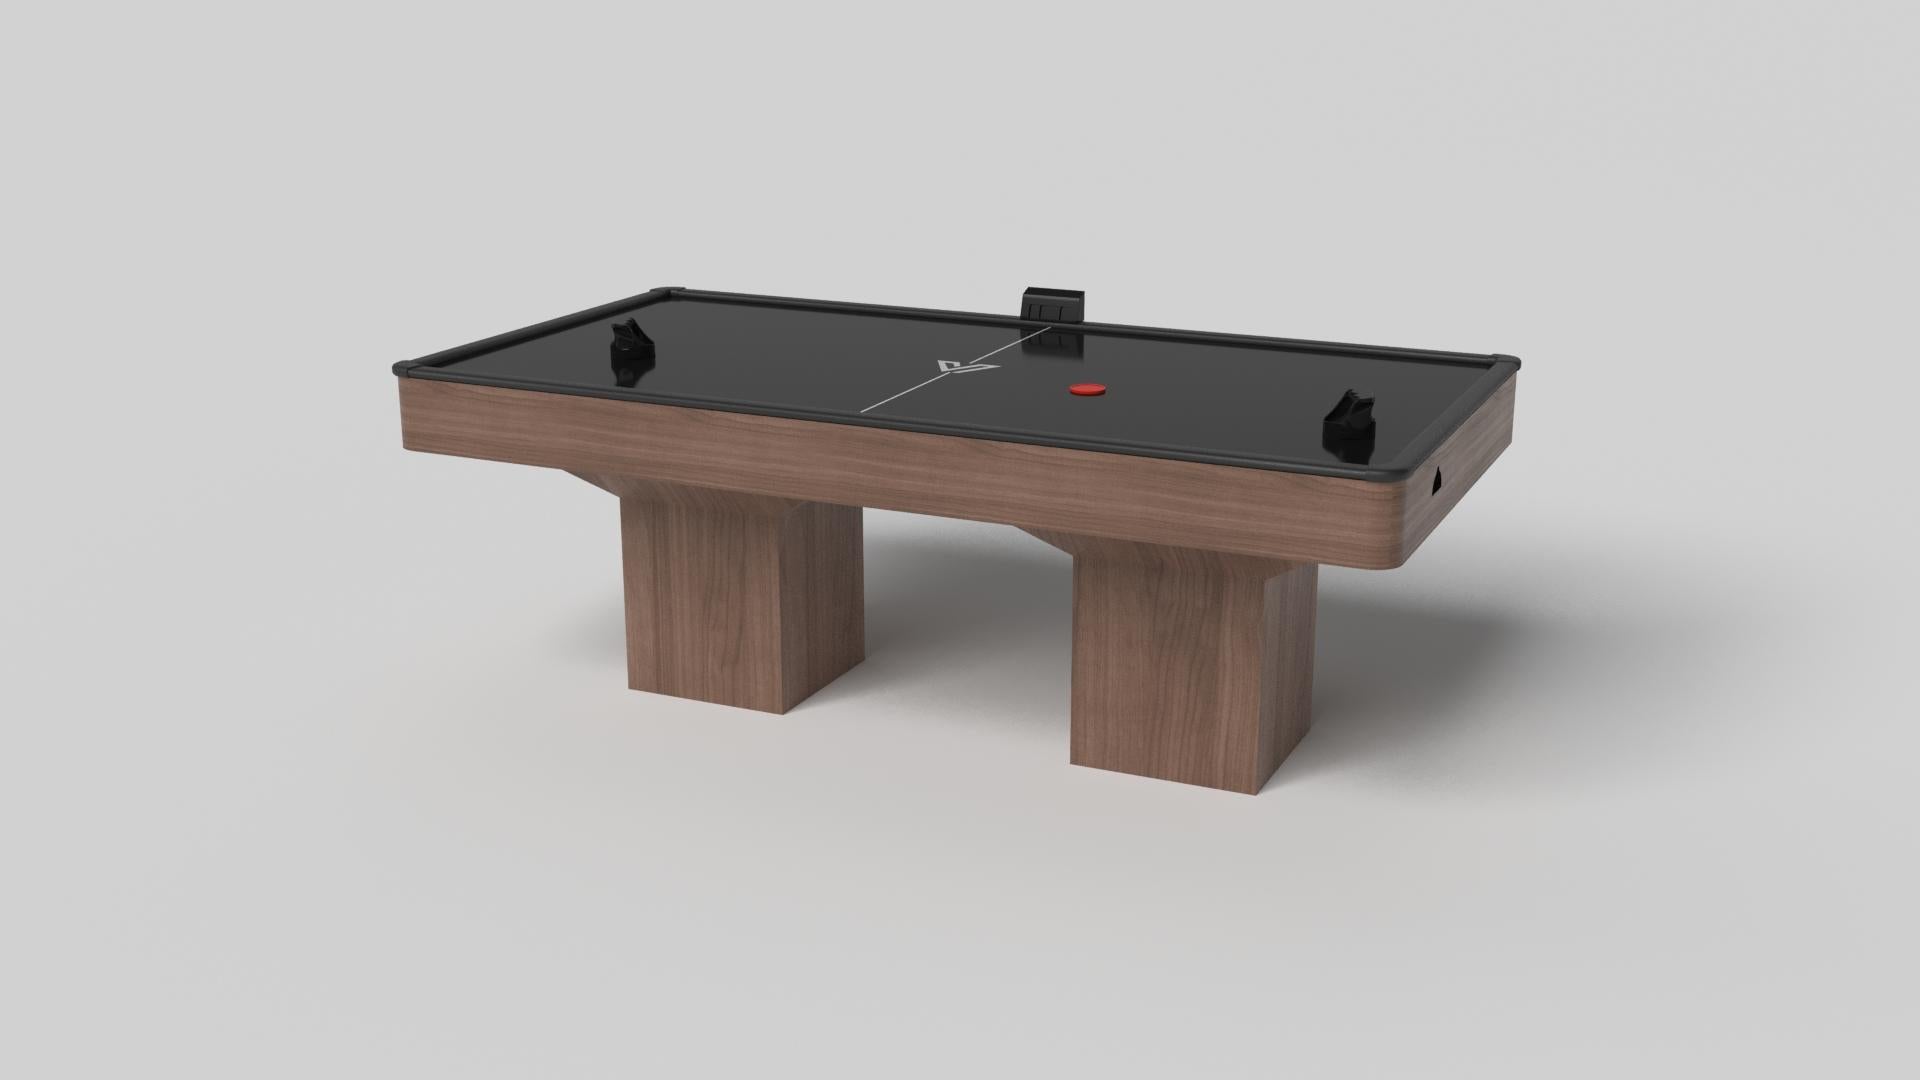 Minimalist design meets opulent elegance in the Trestle air hockey table. Detailed with a professional surface for endless game play, this contemporary table is expertly crafted. Square block legs give it a stark, geometric look that contributes to